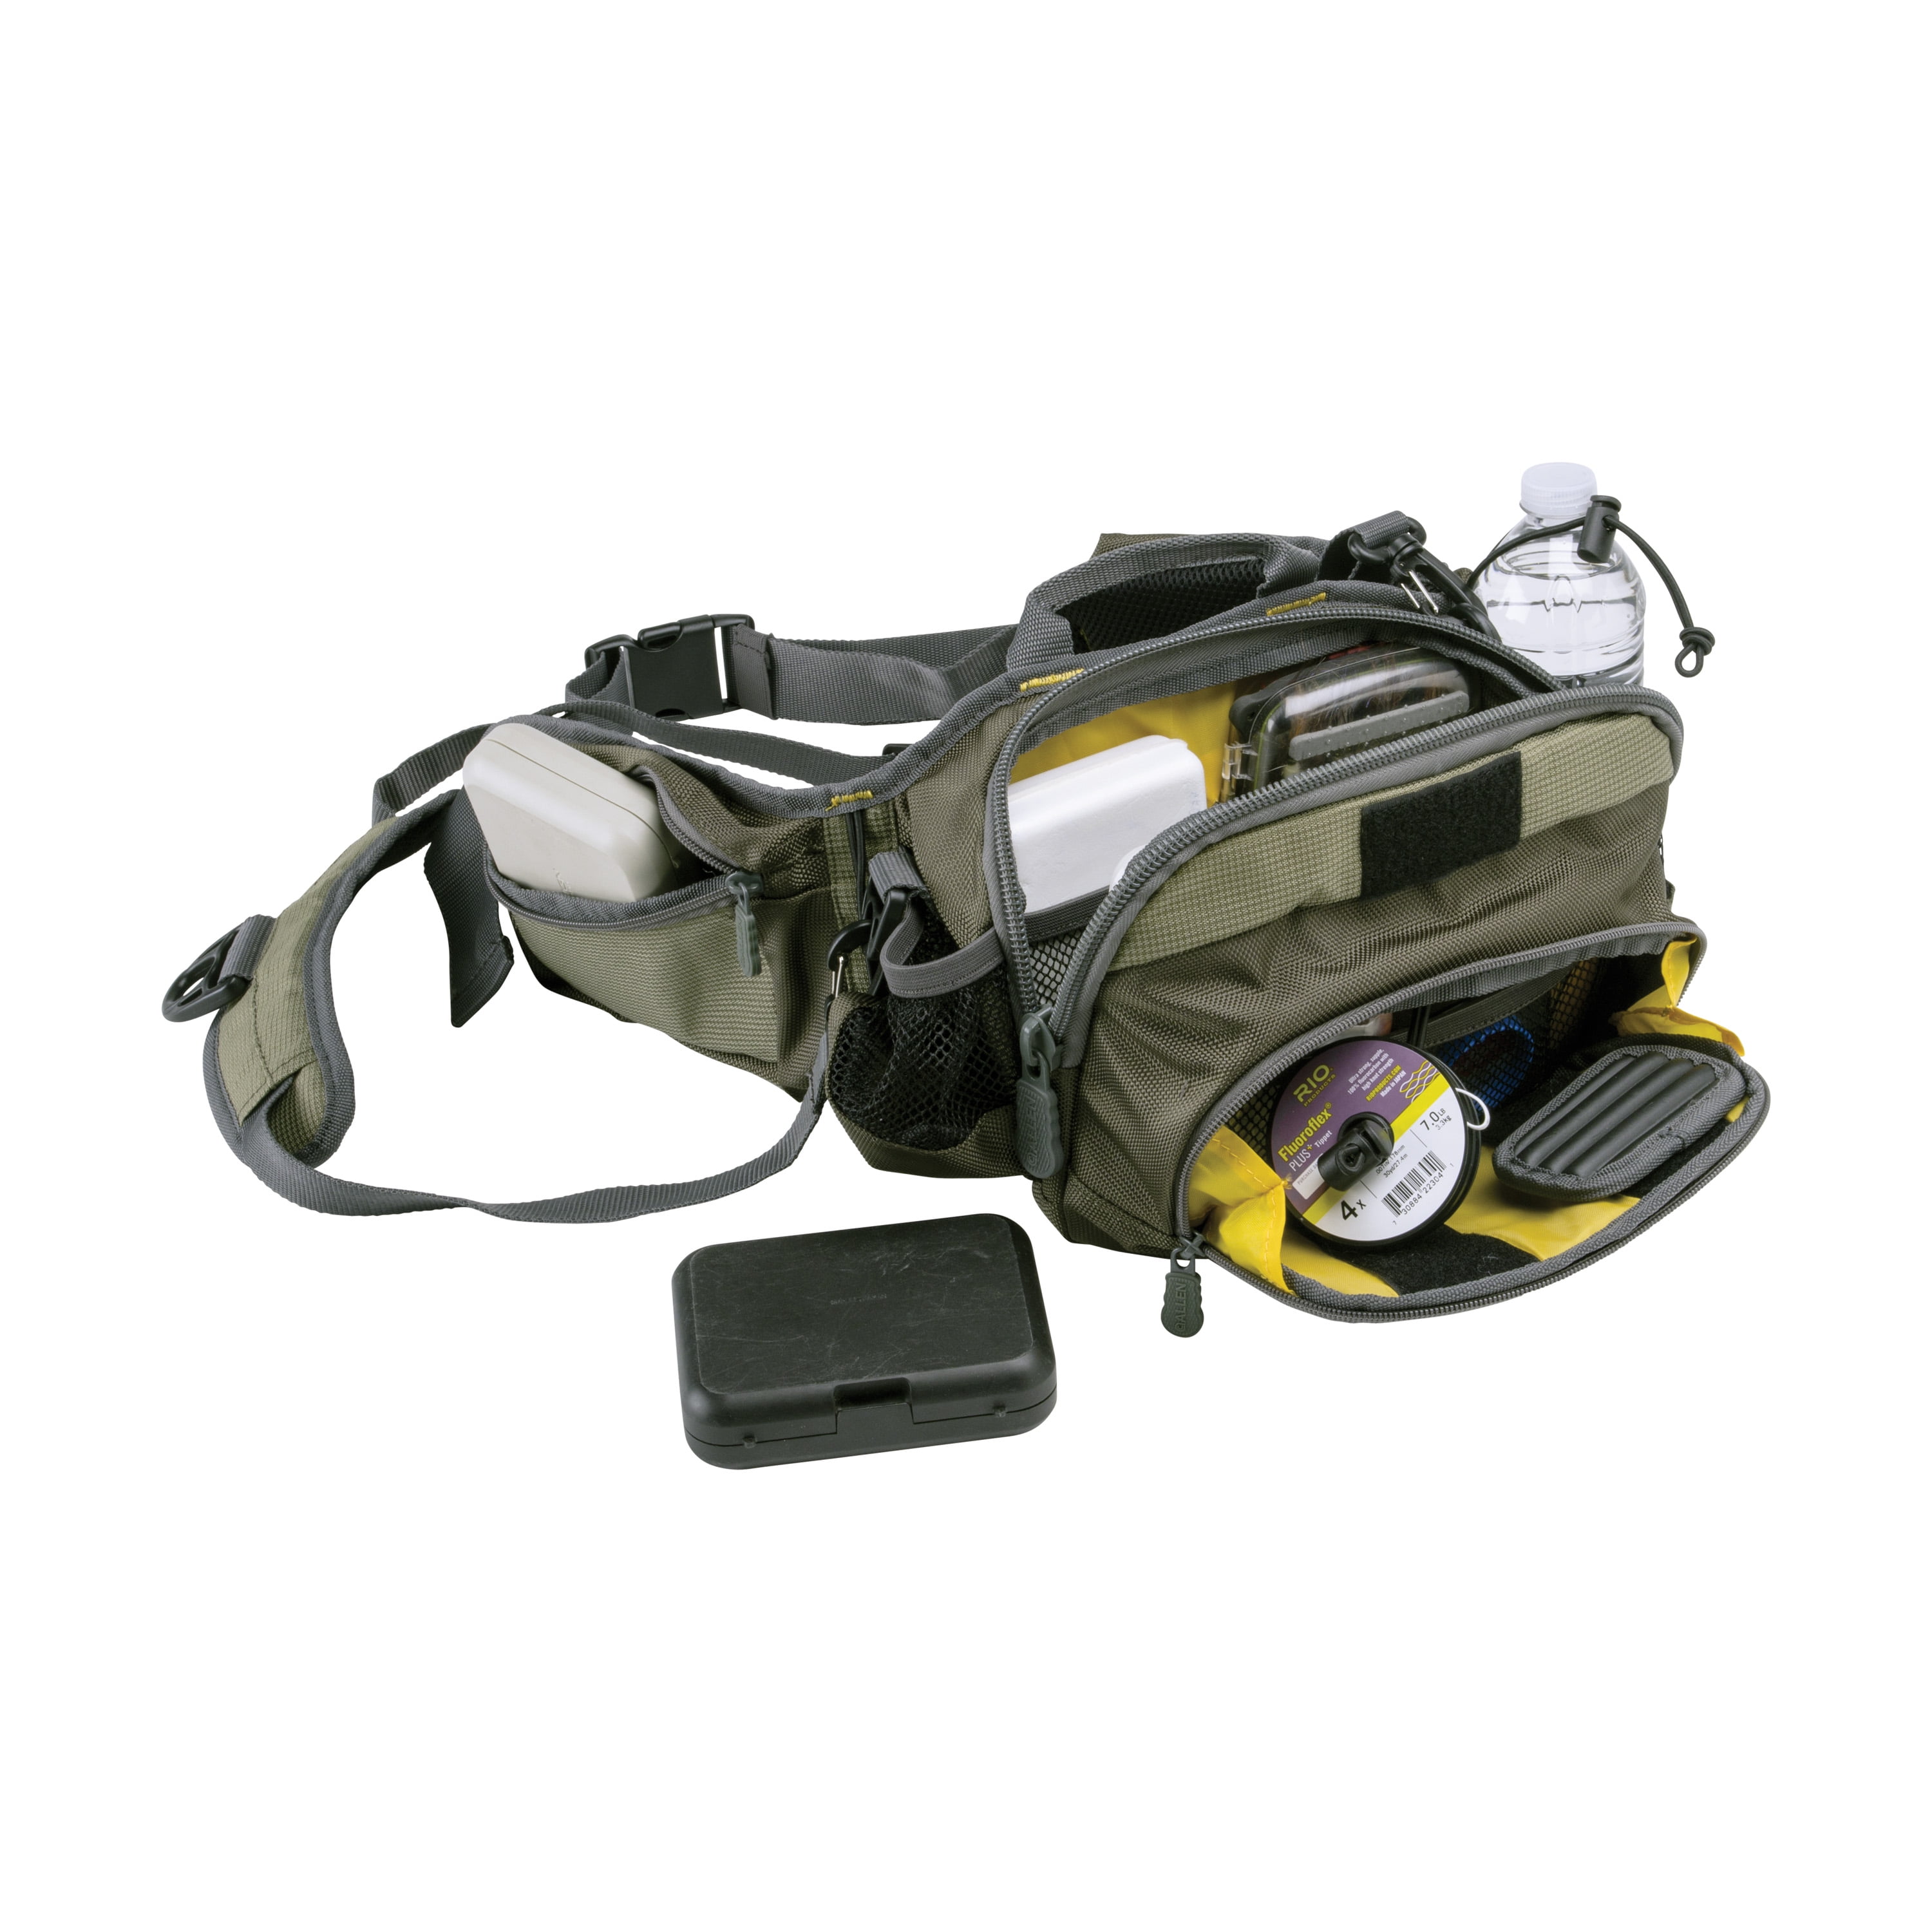 Allen Company Eagle River Lumbar Fly Fishing Pack, Gray/Lime